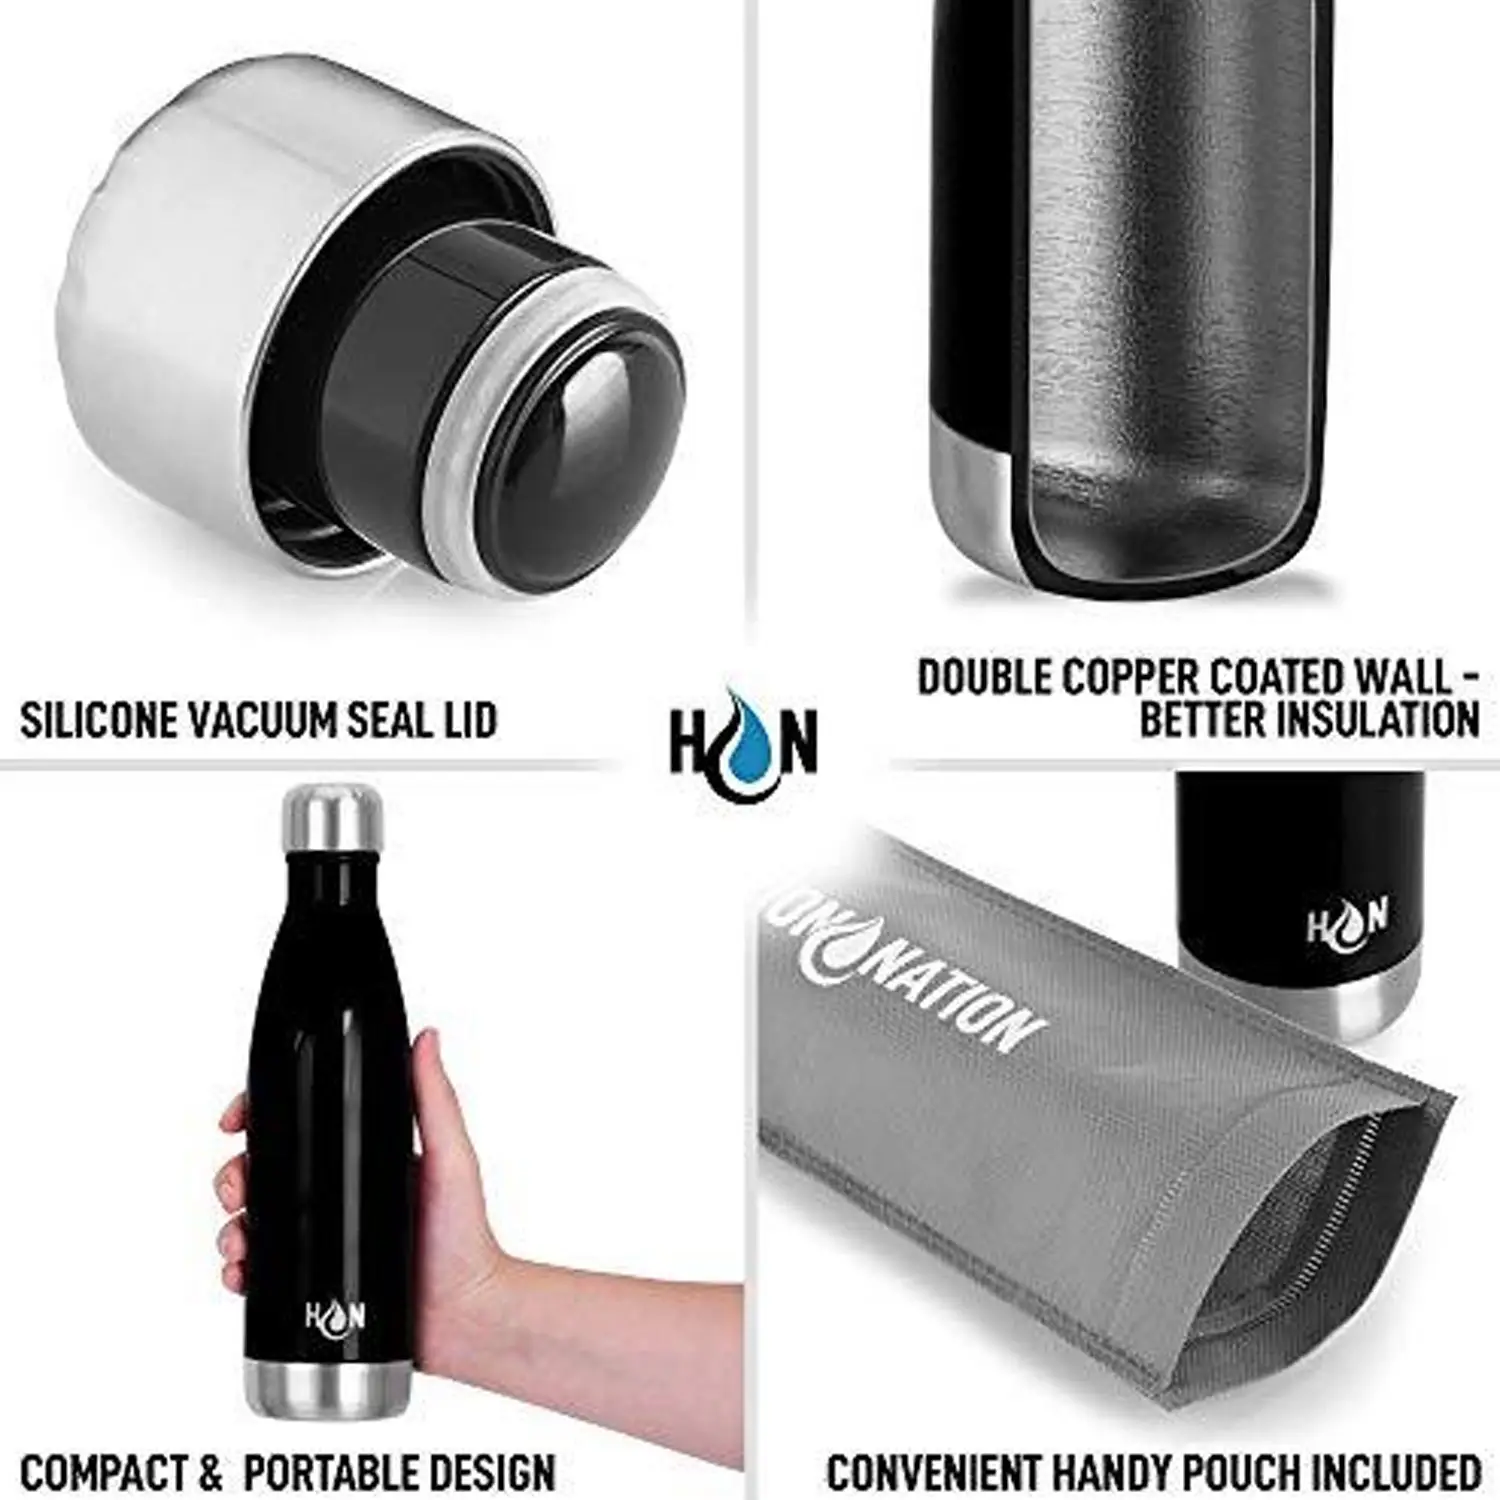 Hydration Nation Stainless Steel - Double Wall Insulated Metal Water Bottle For Hot And Cold Drinks